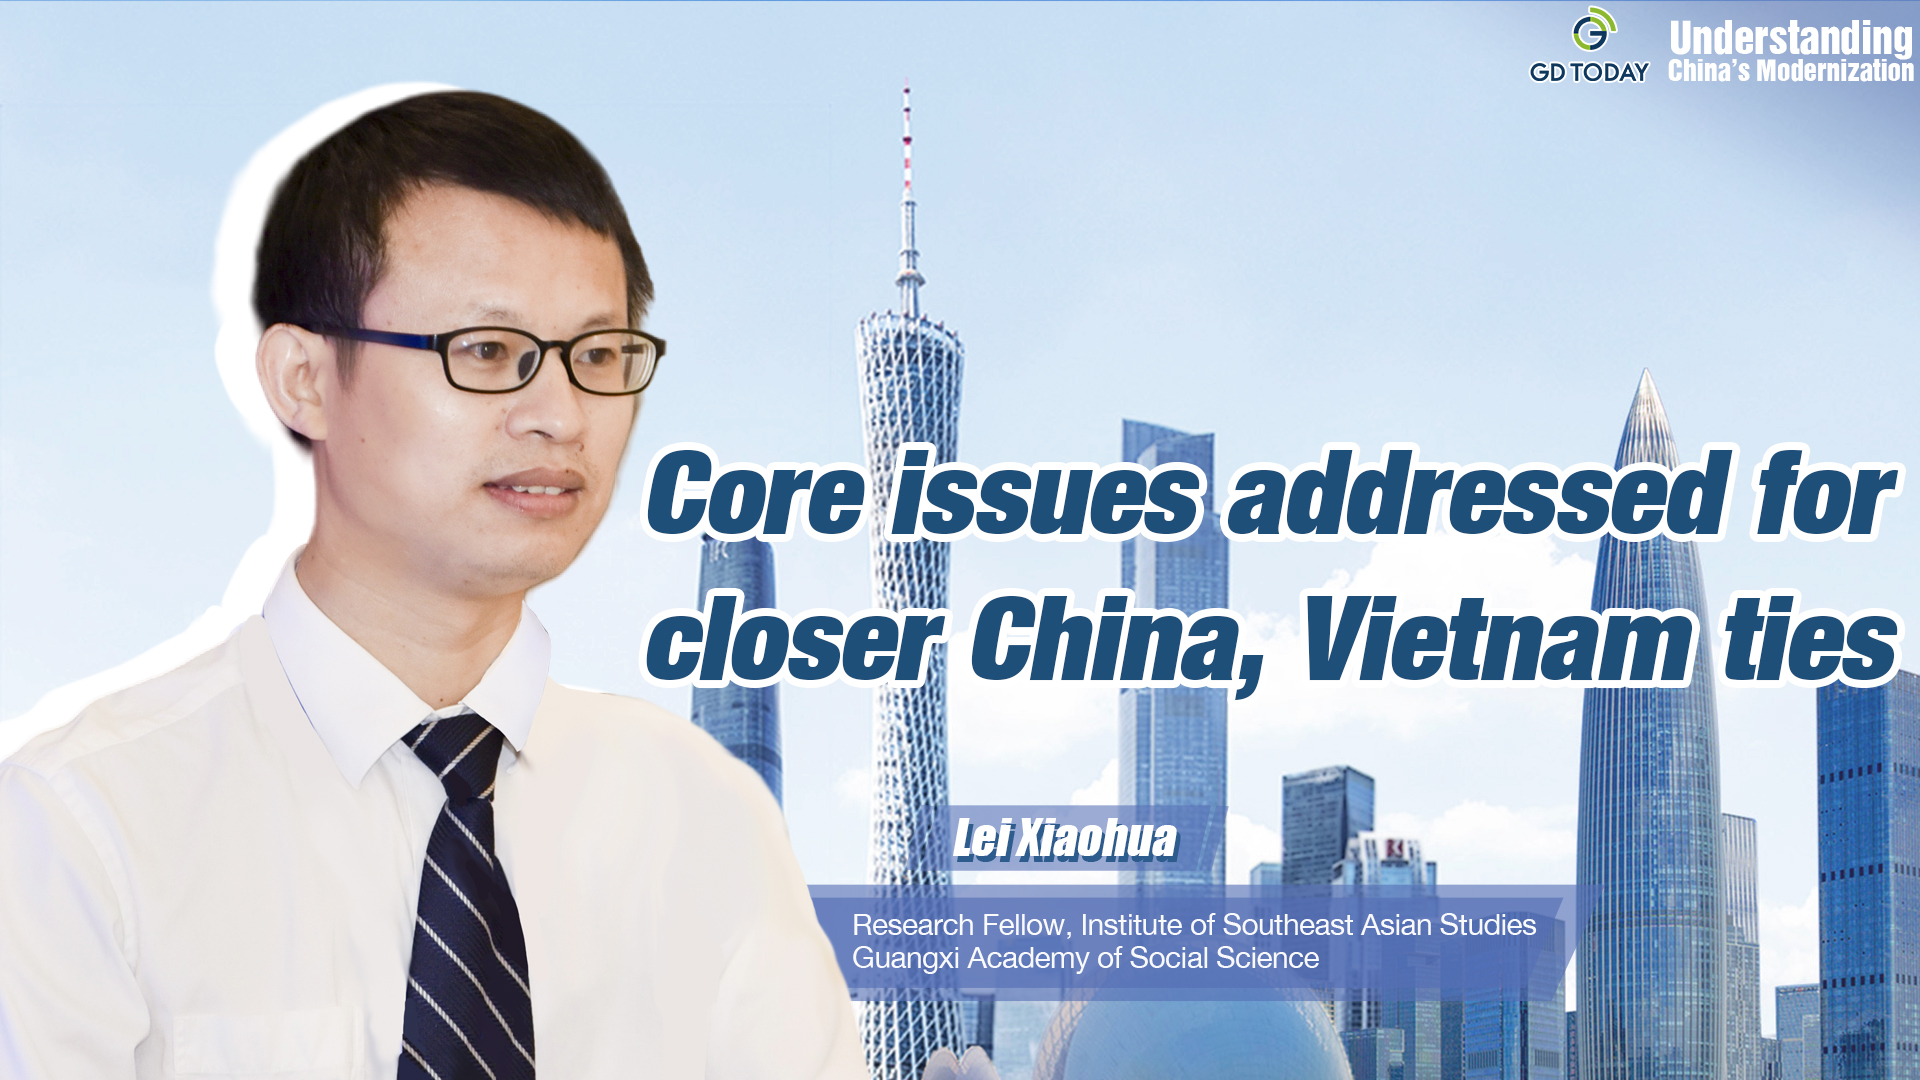 Core issues addressed for closer China, Vietnam ties